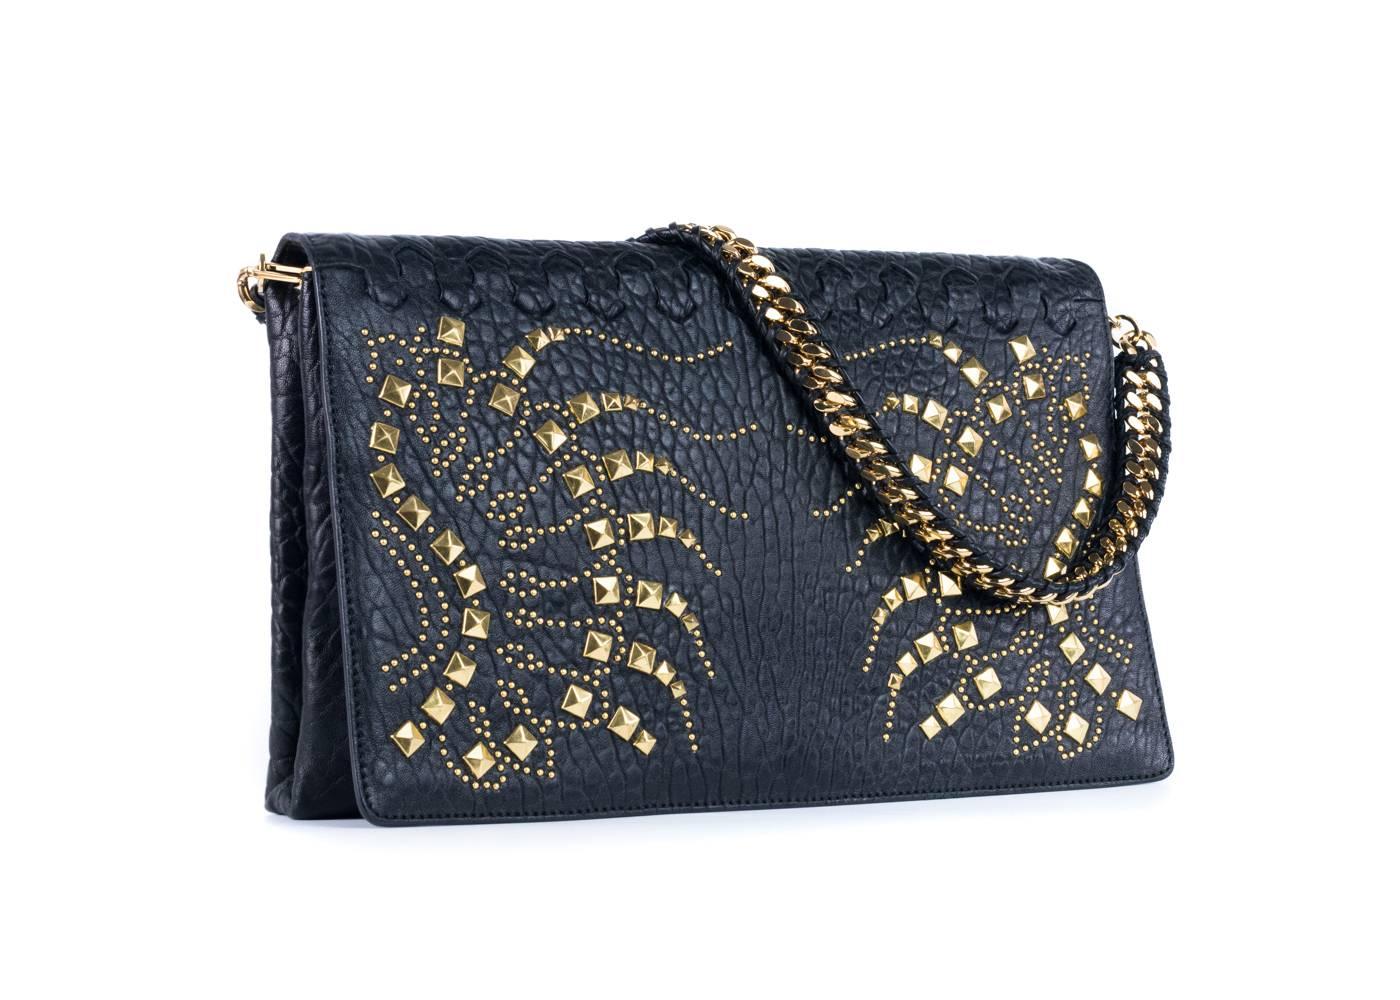 Brand New Roberto Cavalli Clutch
Original Tags & Dust Bag Included
Retails in Stores & Online for $2200
Dimensions: 13